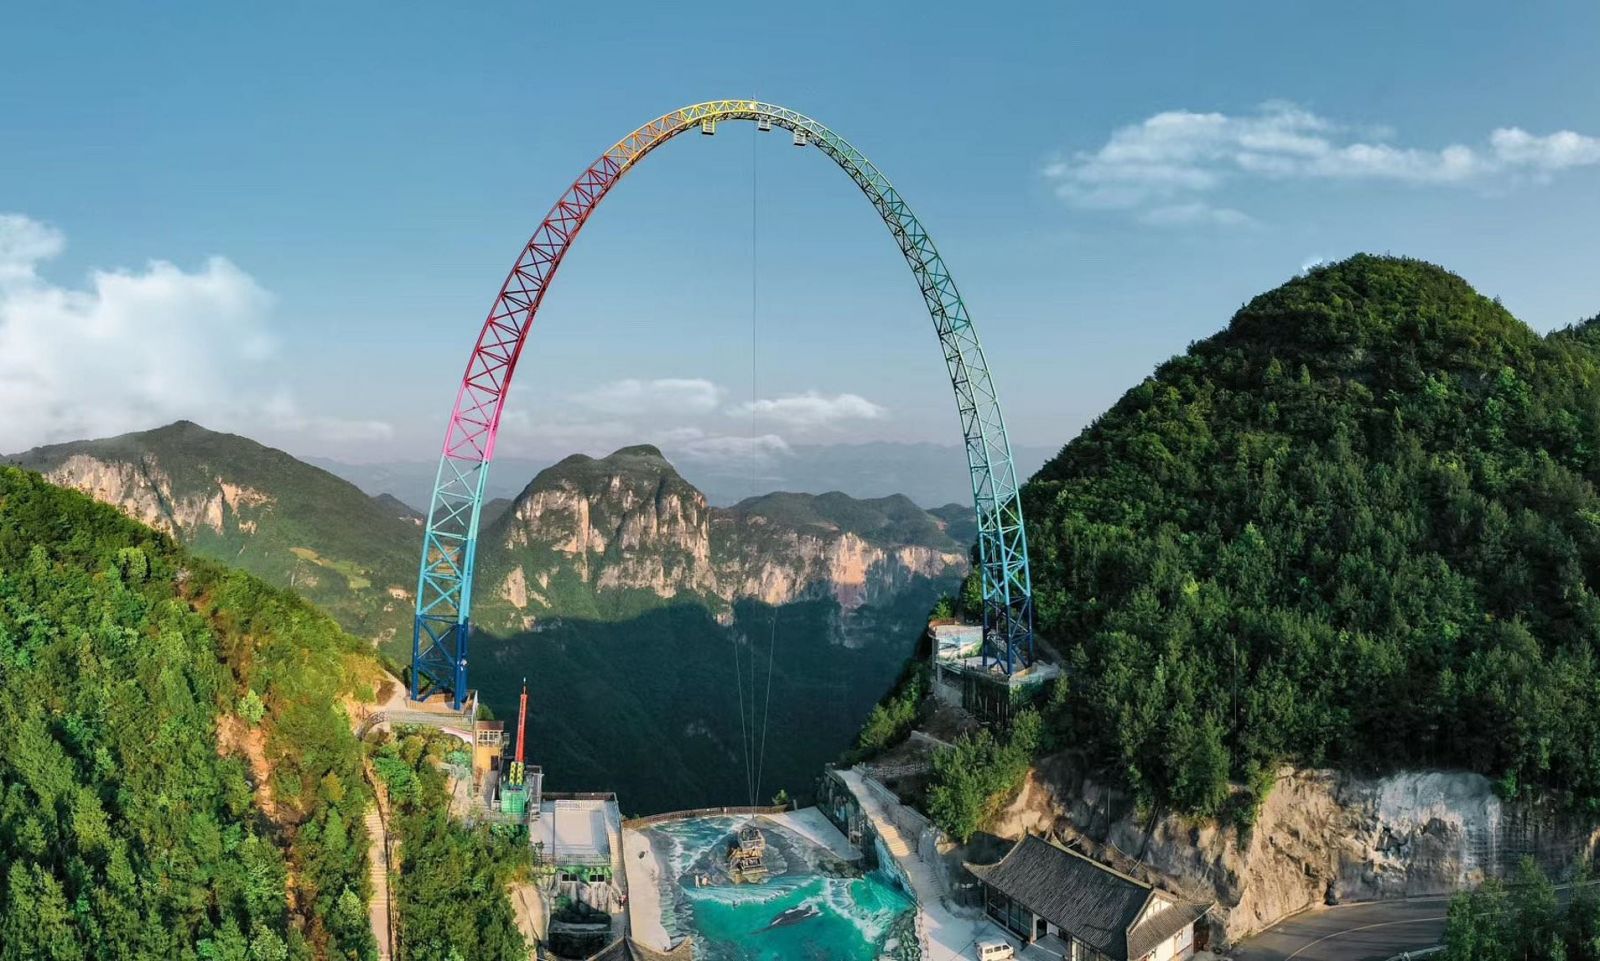 China has built the world's largest and scariest swing